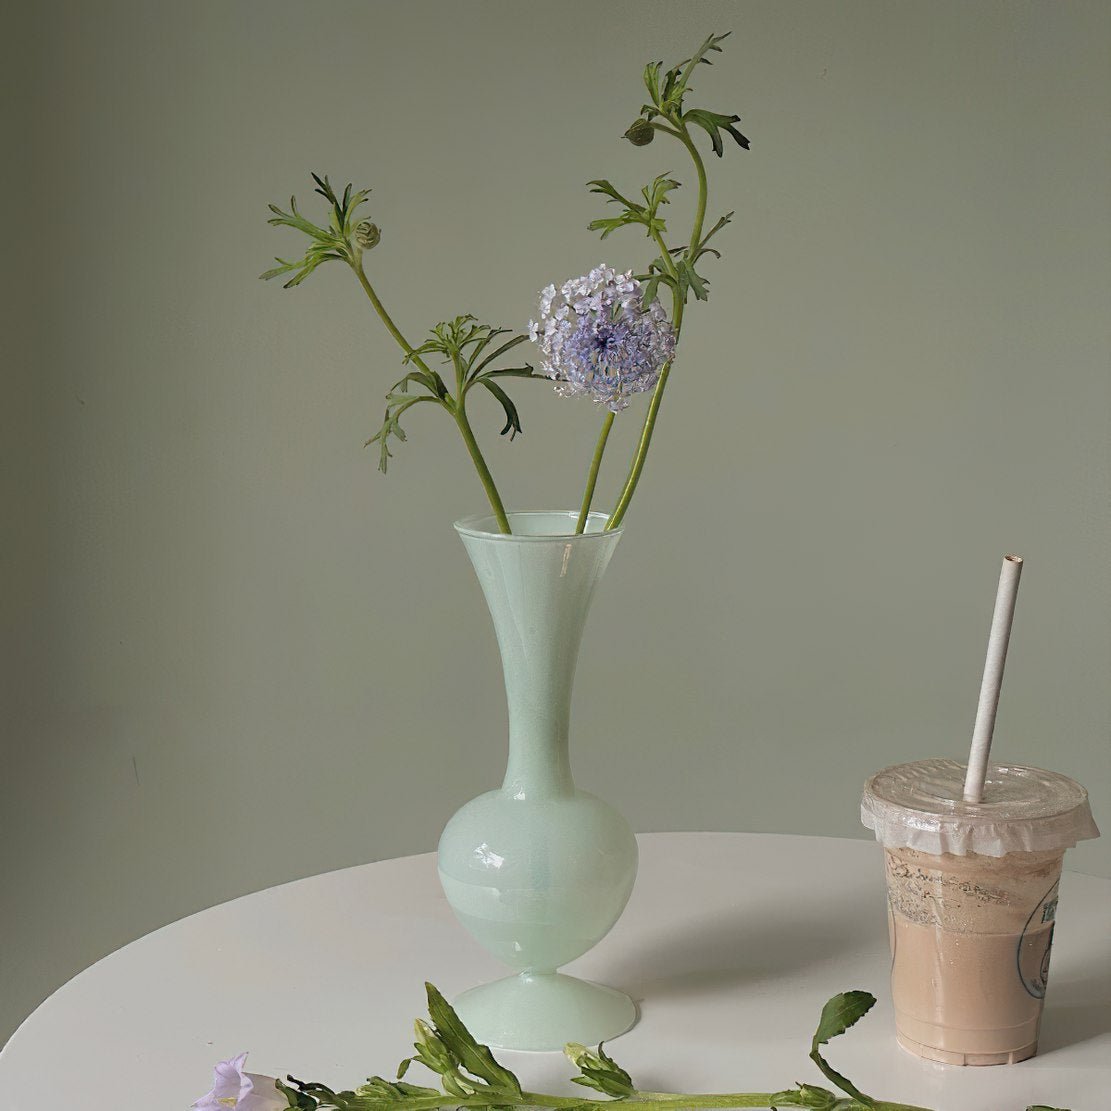 Pastel green classic flower vase with purple flower